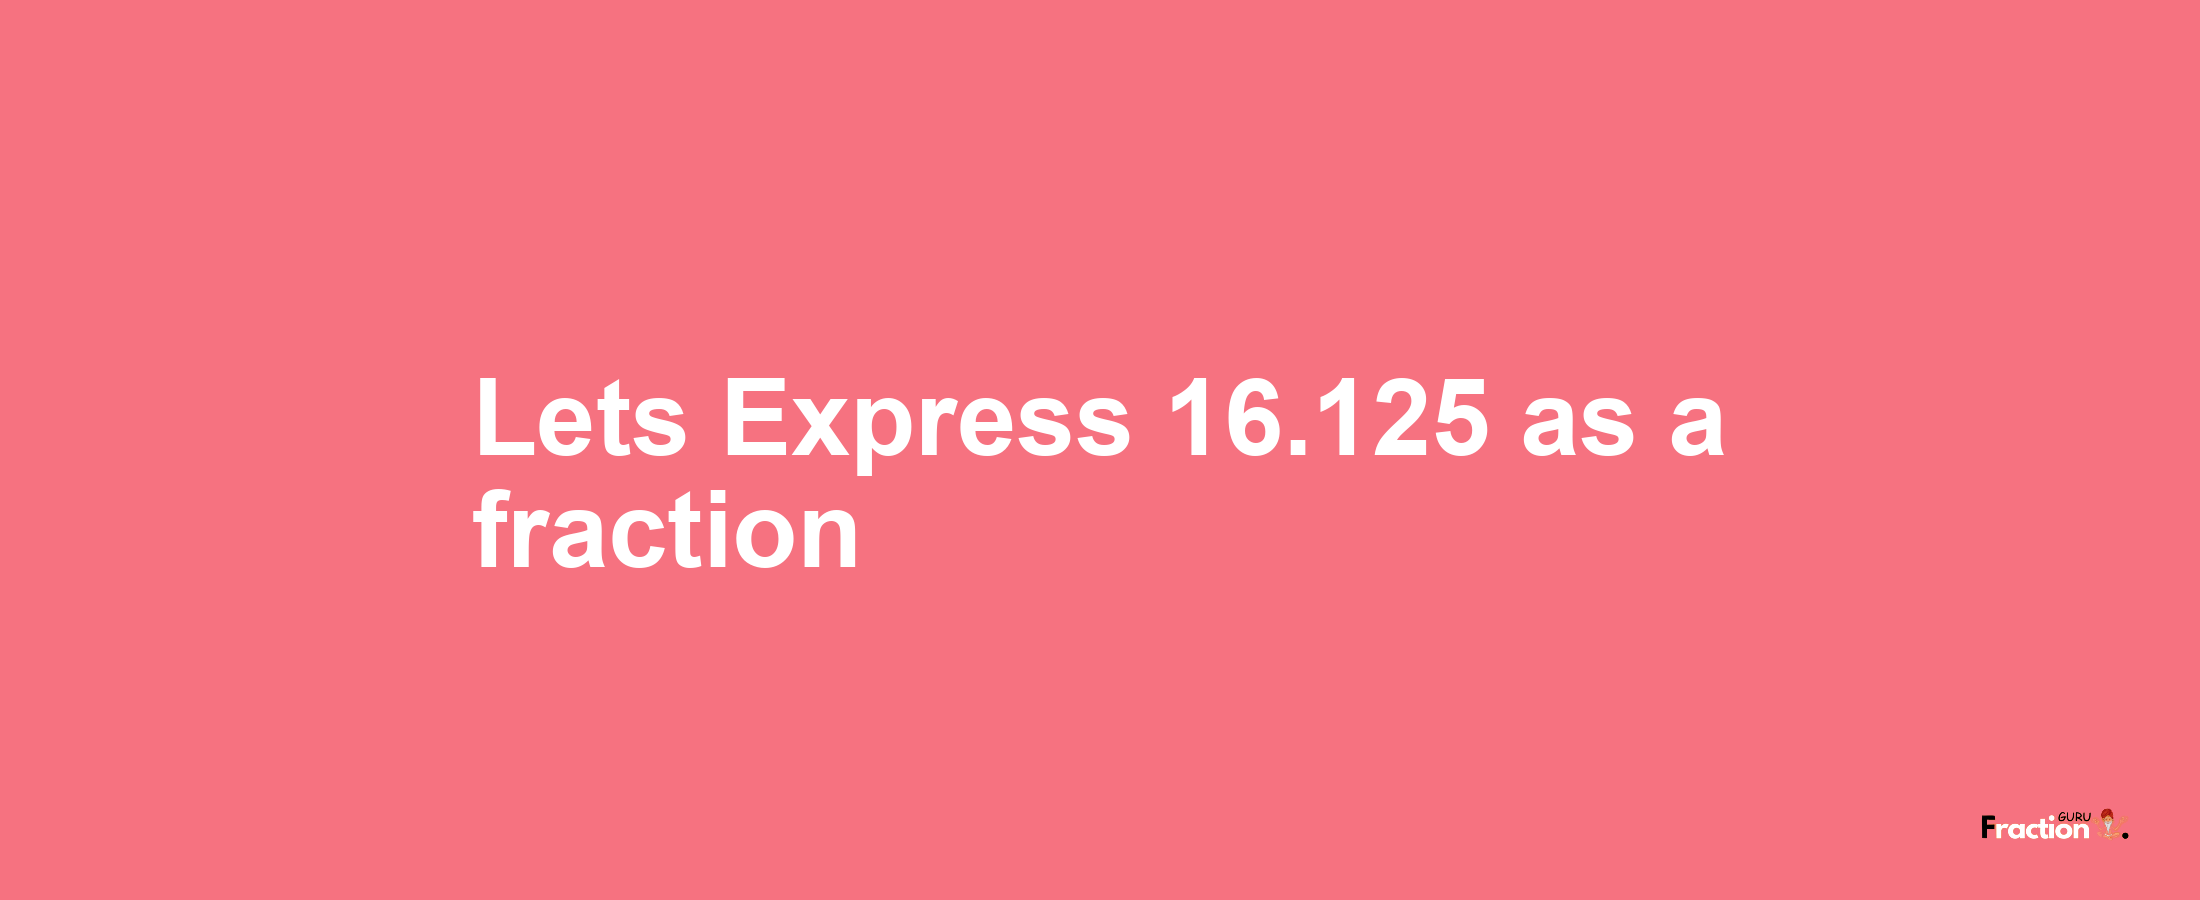 Lets Express 16.125 as afraction